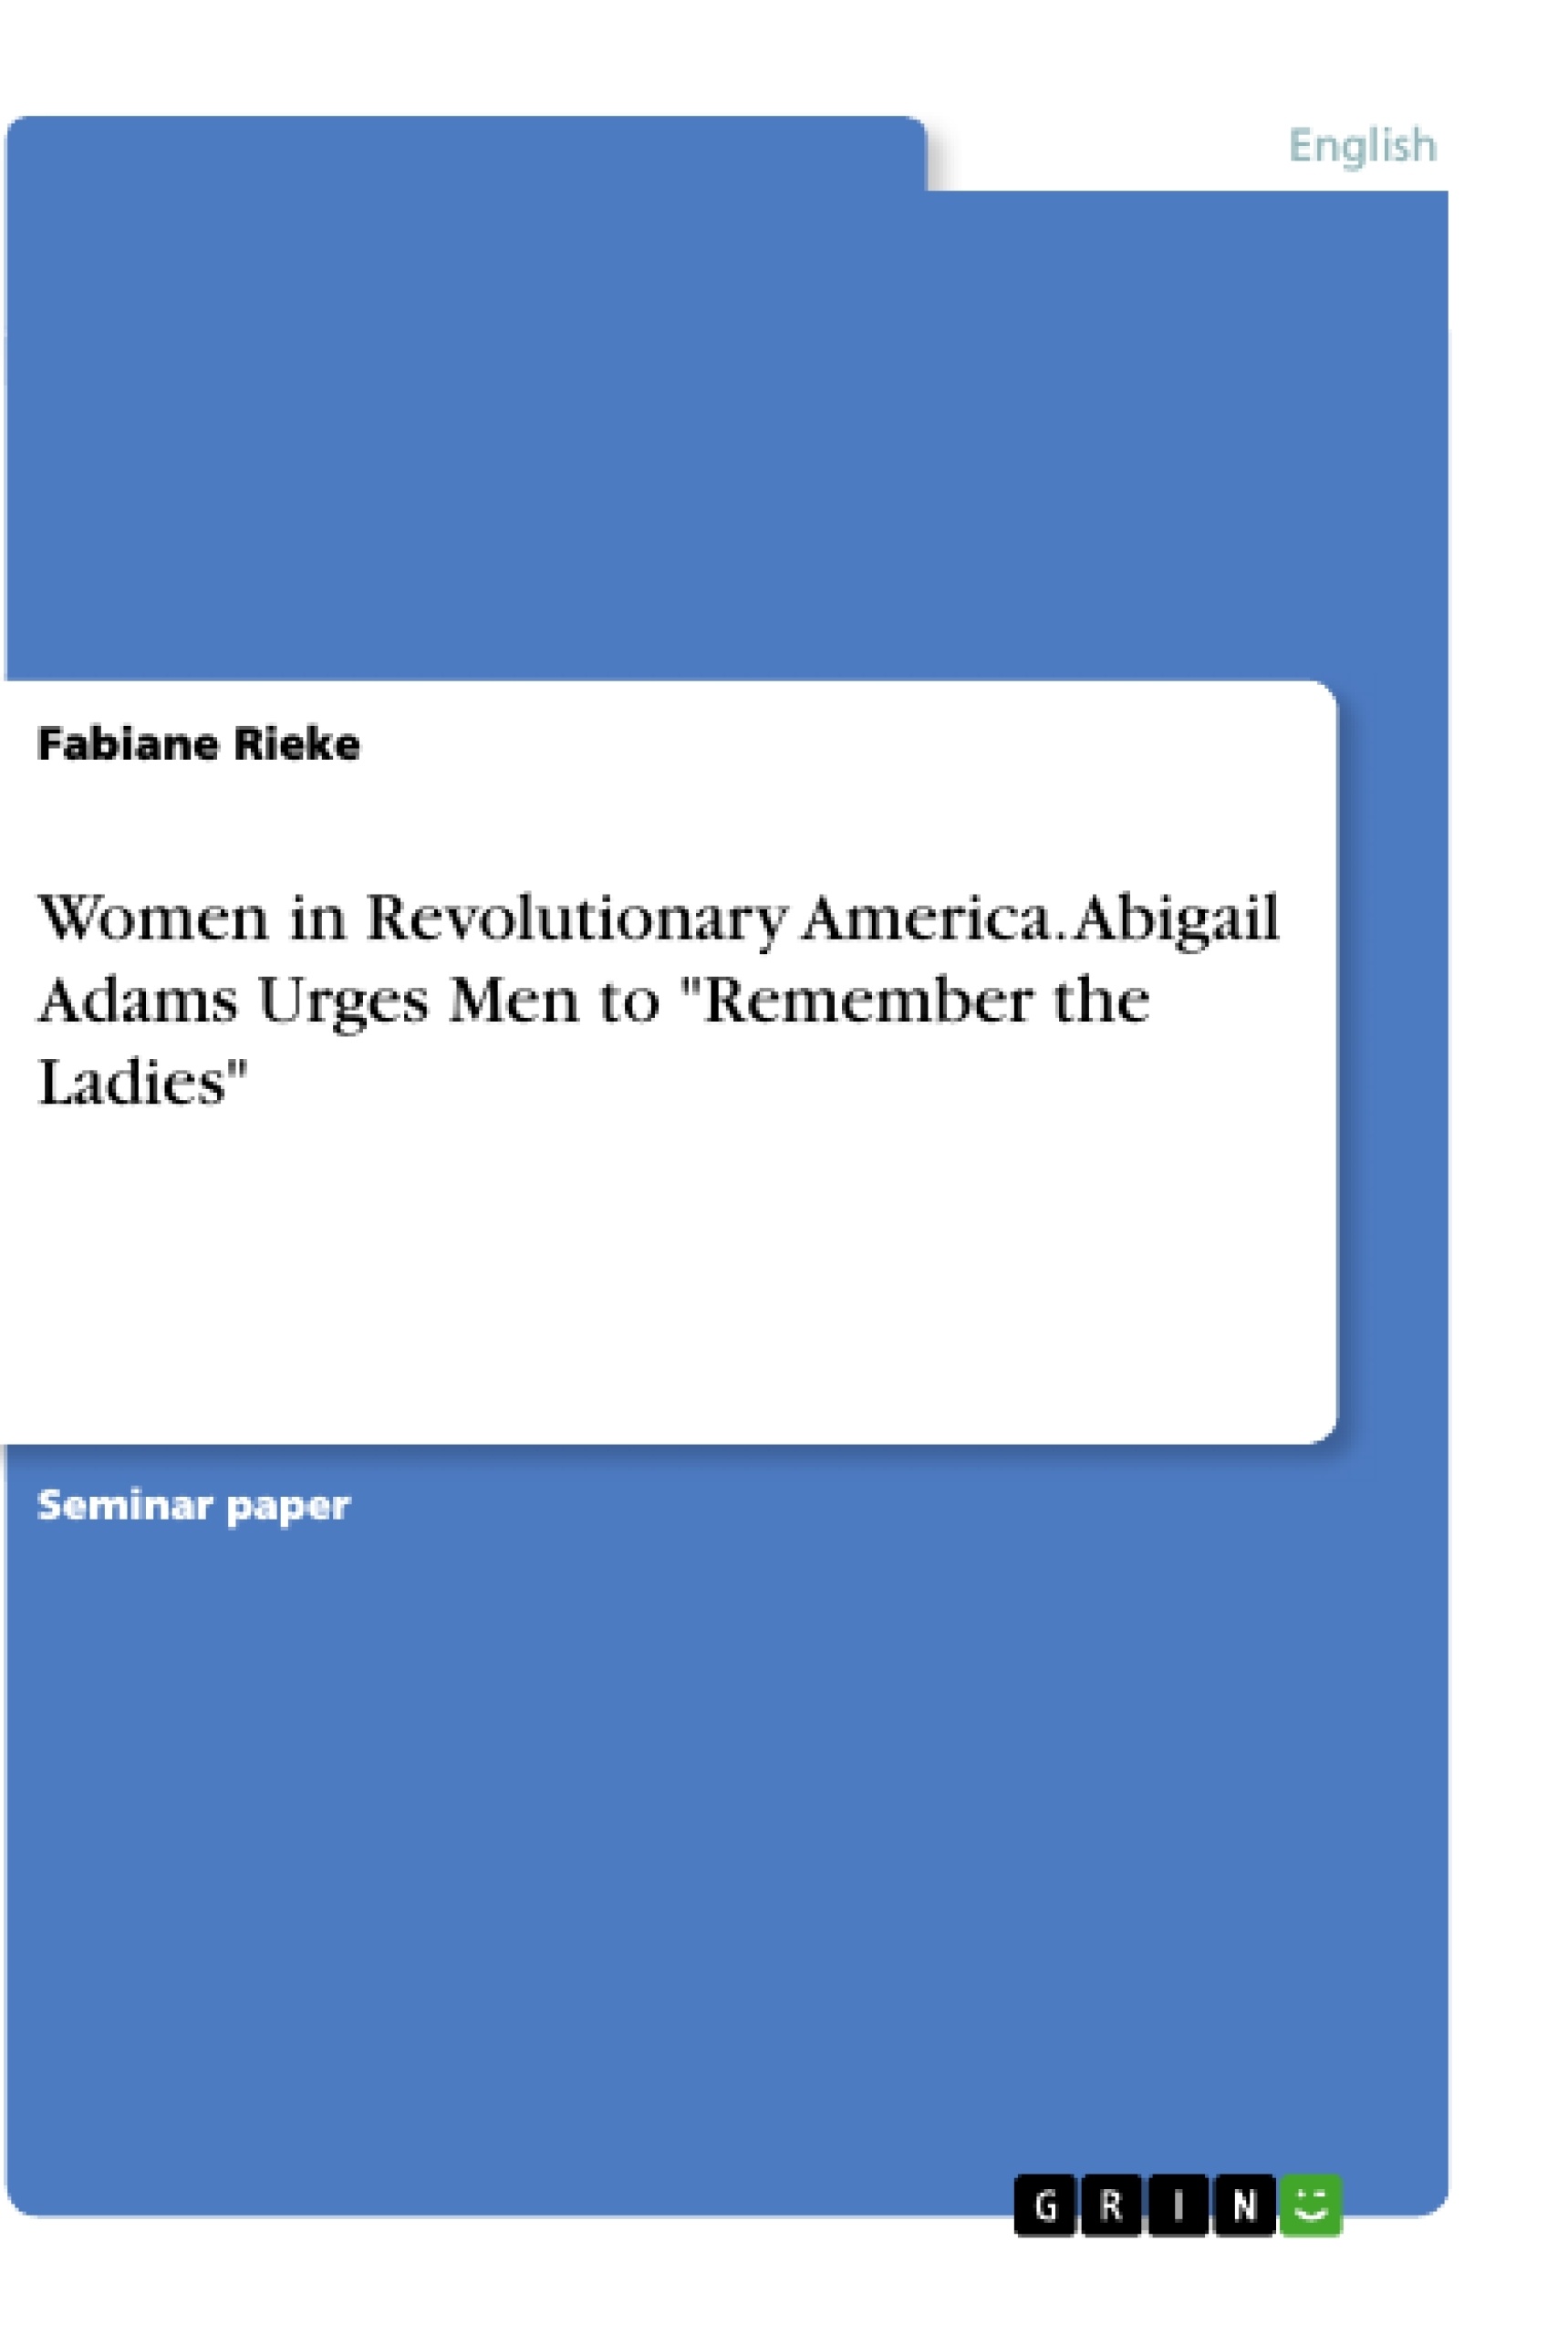 Title: Women in Revolutionary America. Abigail Adams Urges Men to "Remember the Ladies"